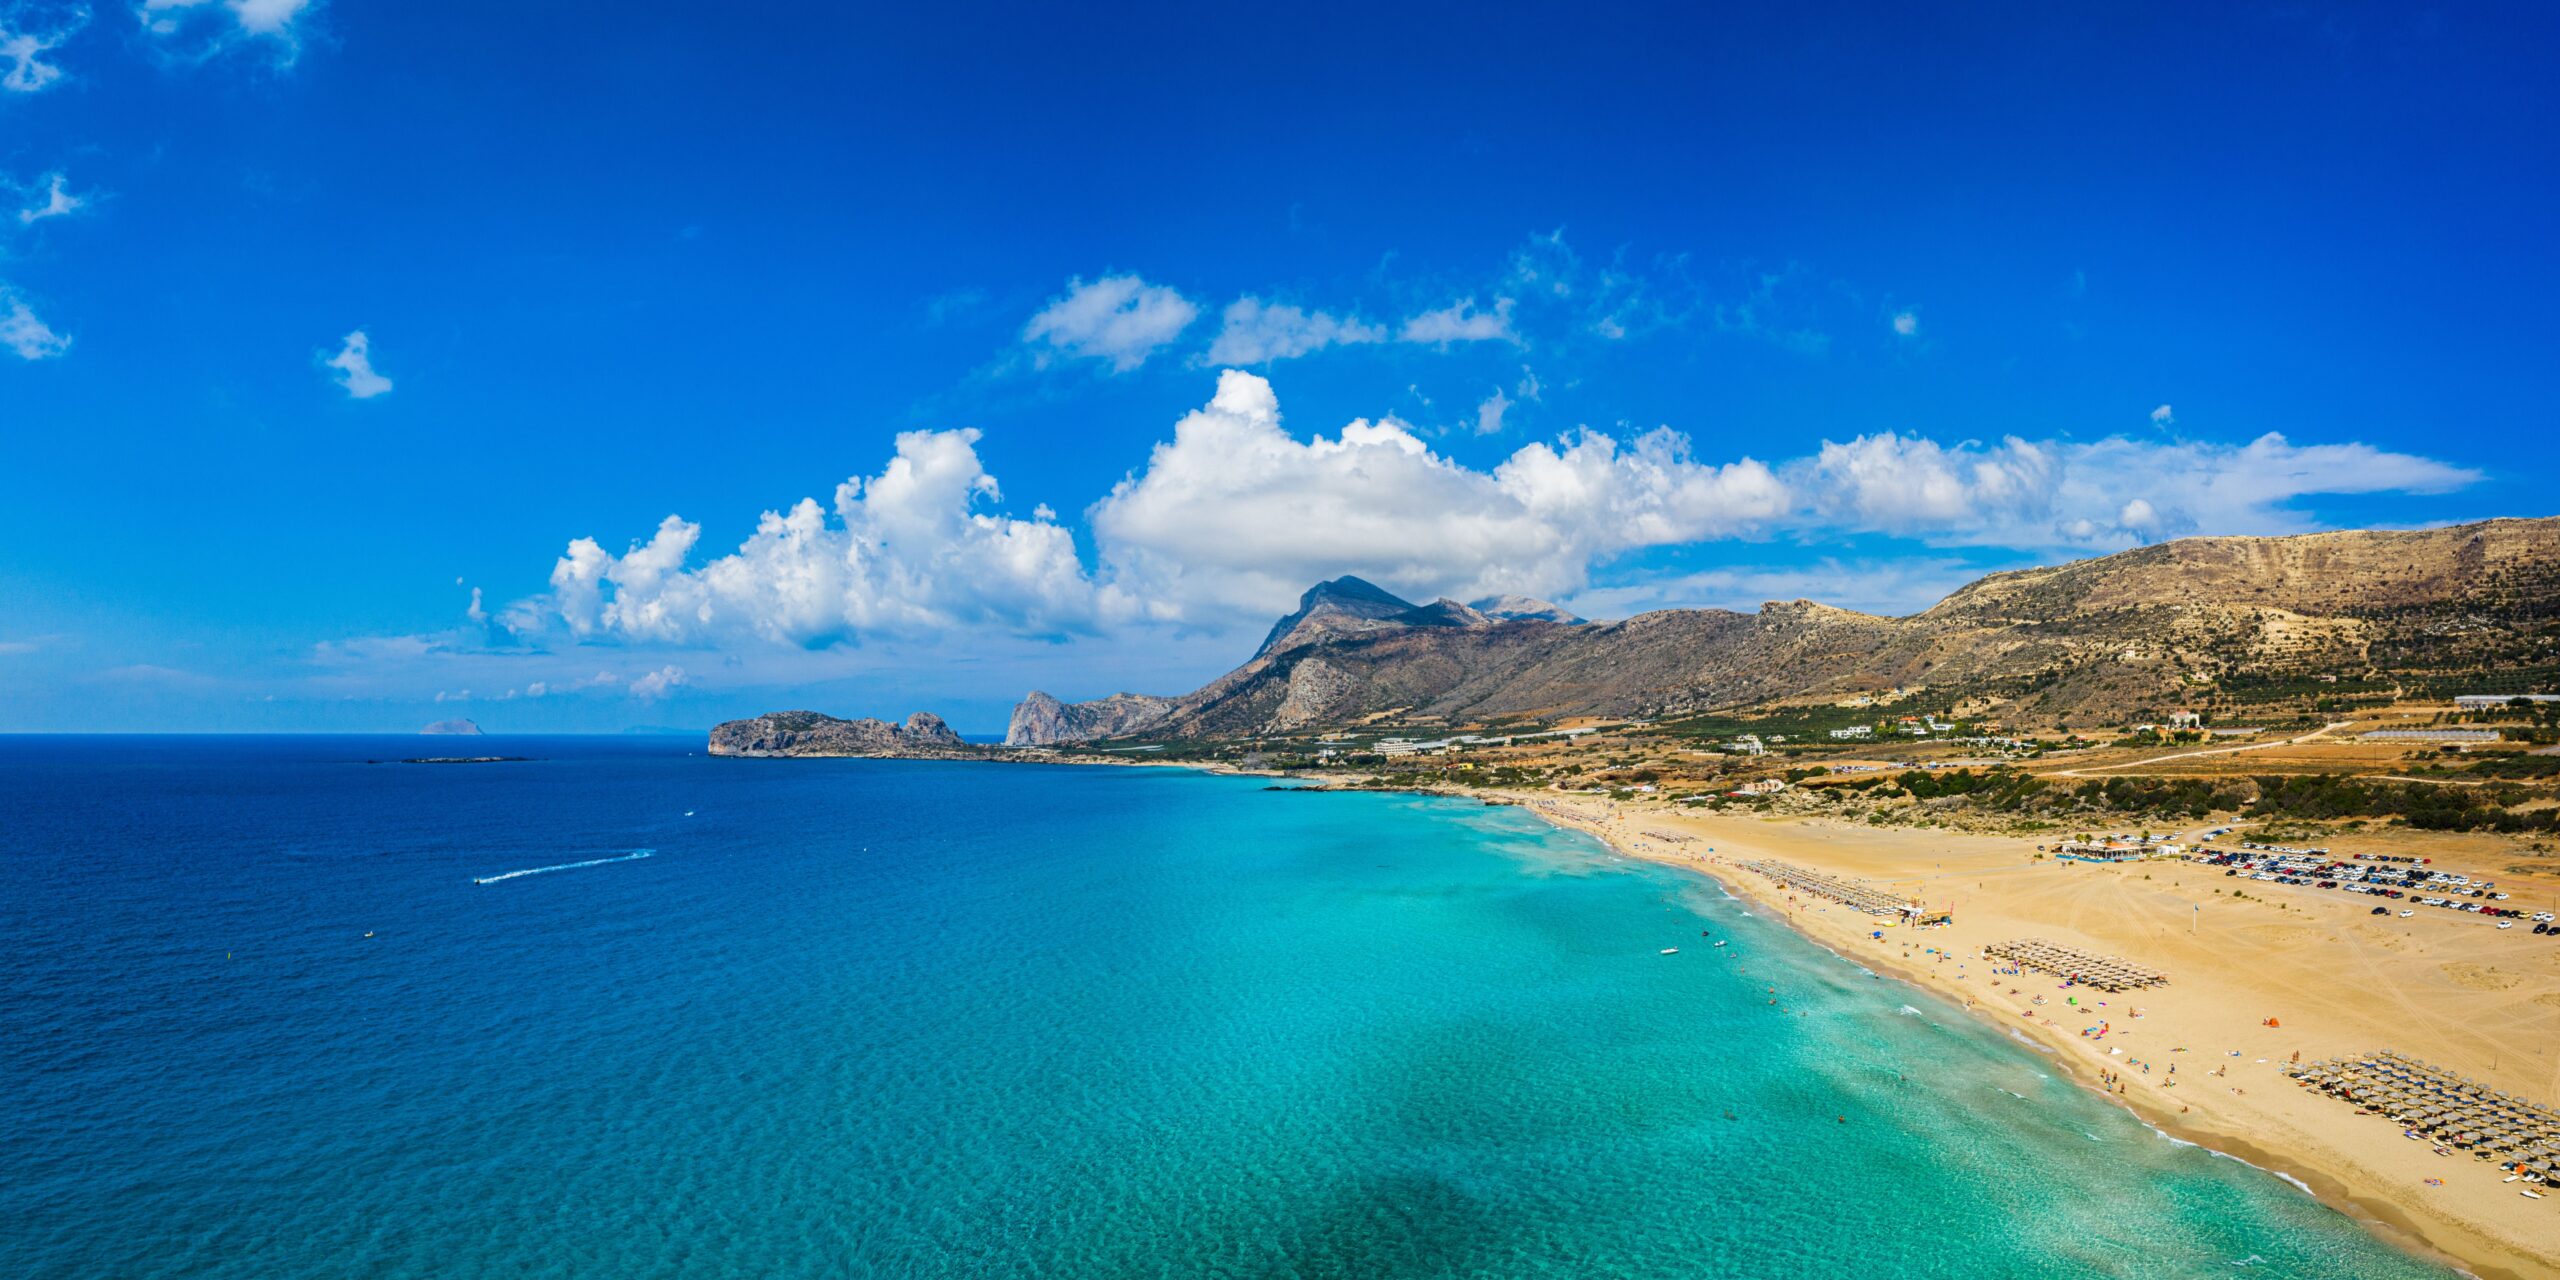 Aerial panoramic view of a long sandy beach with clear blue waters and a mountainous backdrop under a partly cloudy sky.